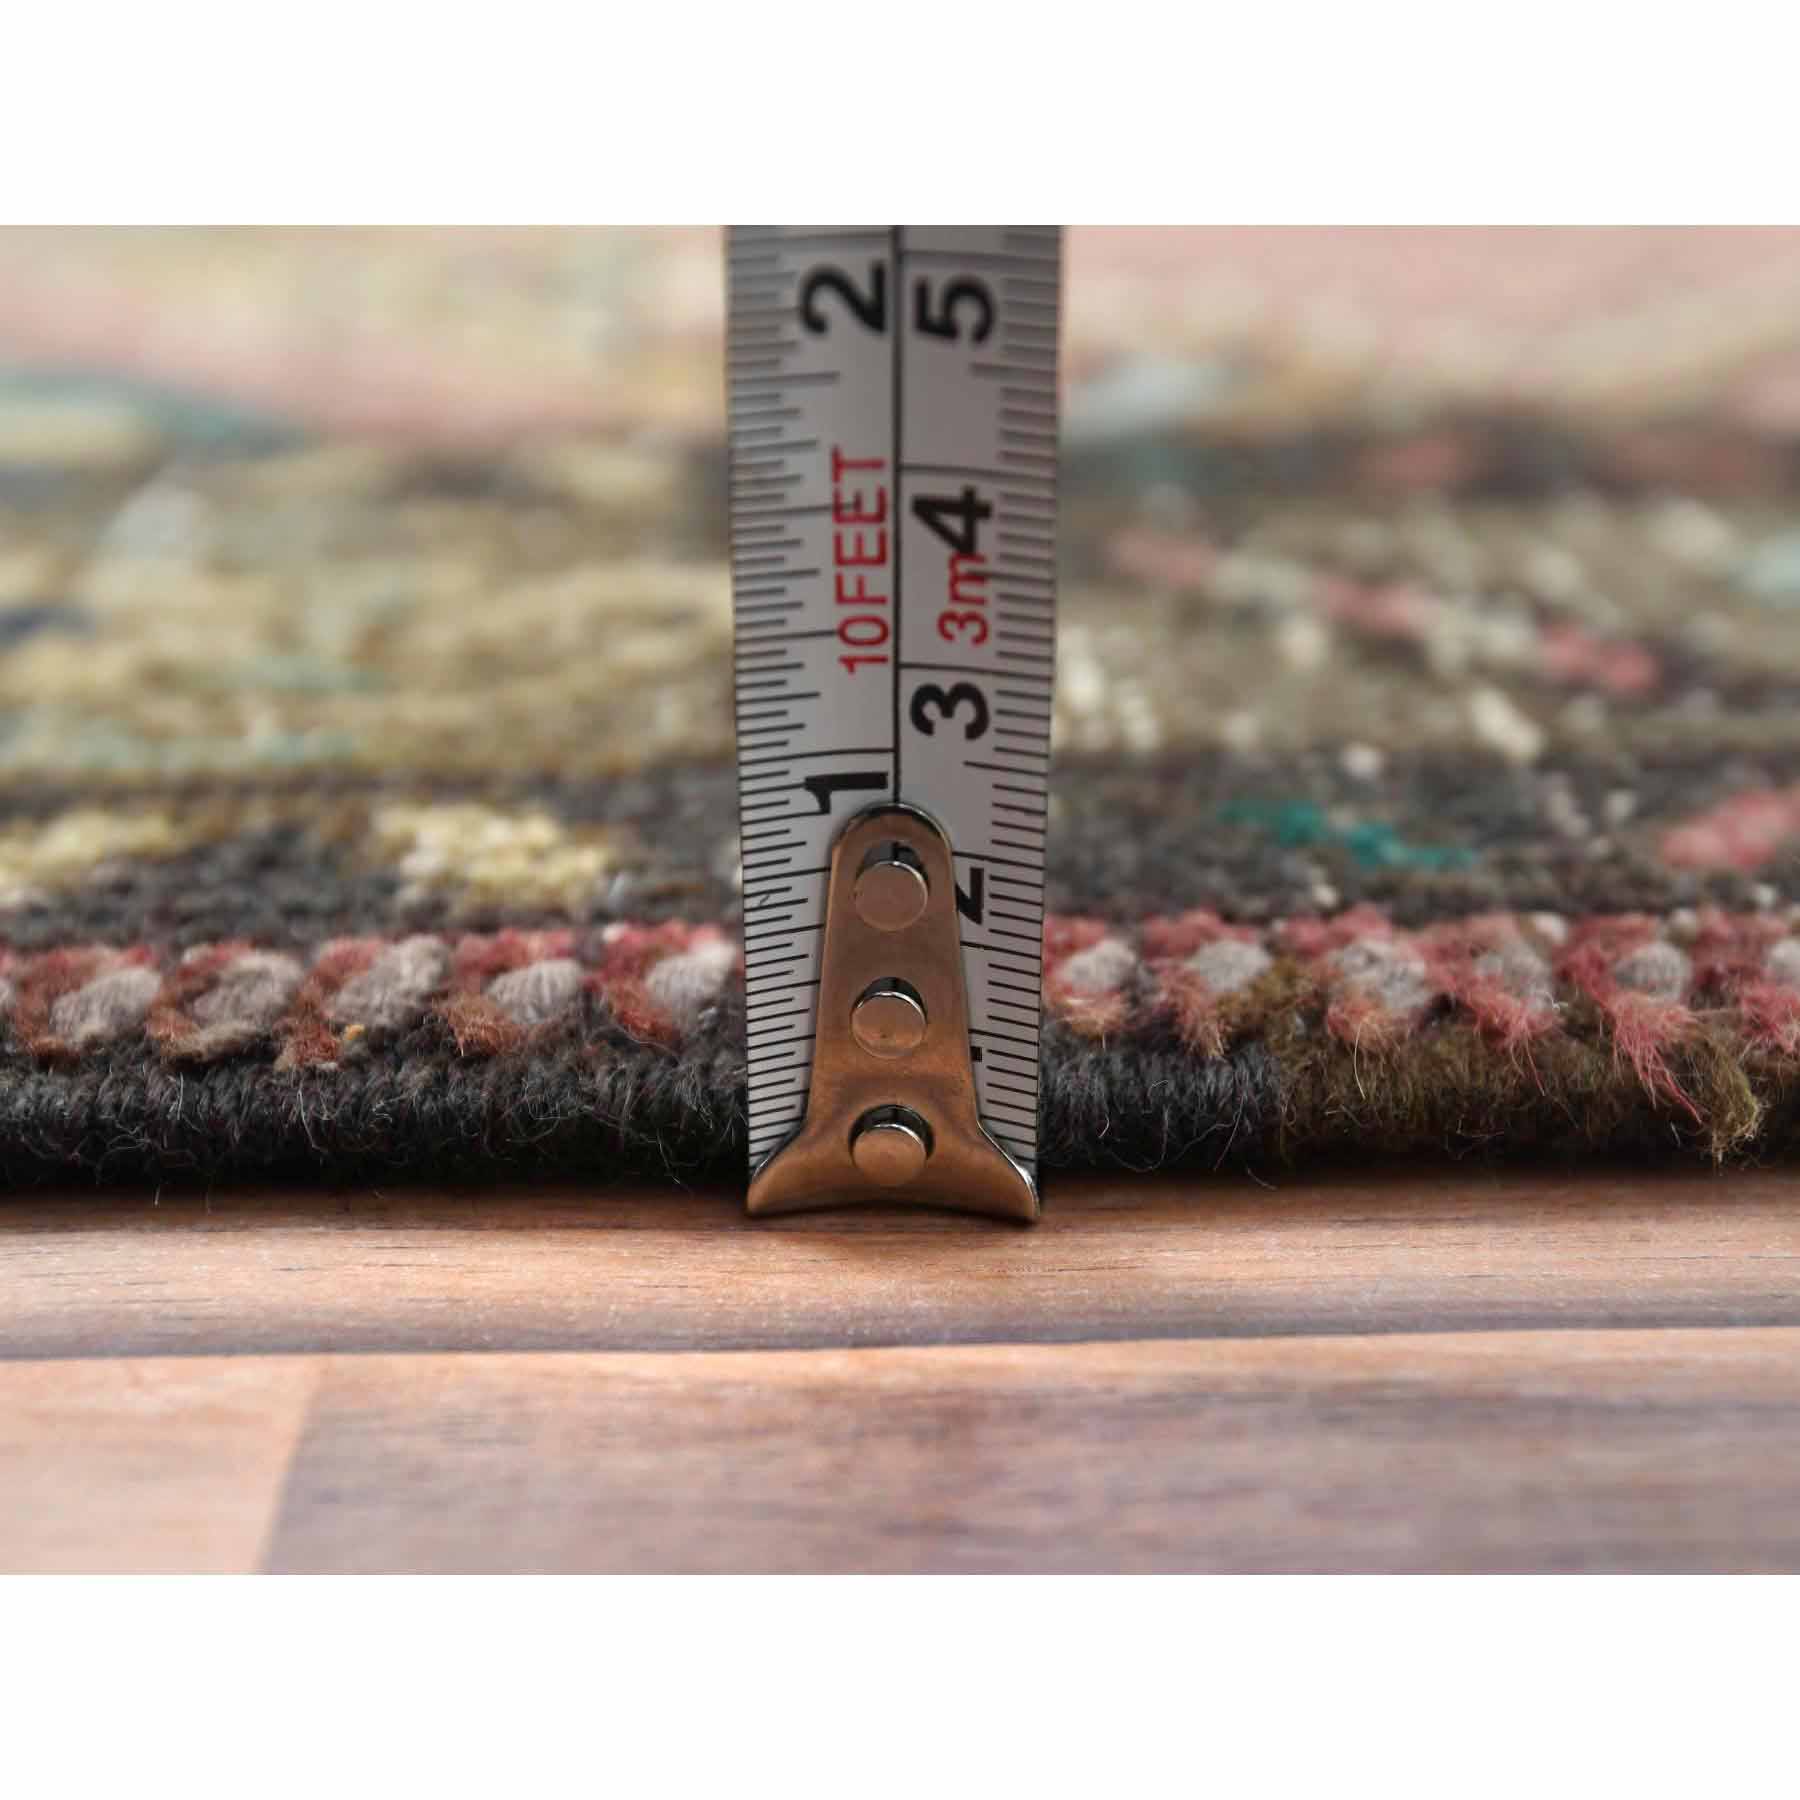 Overdyed-Vintage-Hand-Knotted-Rug-405235